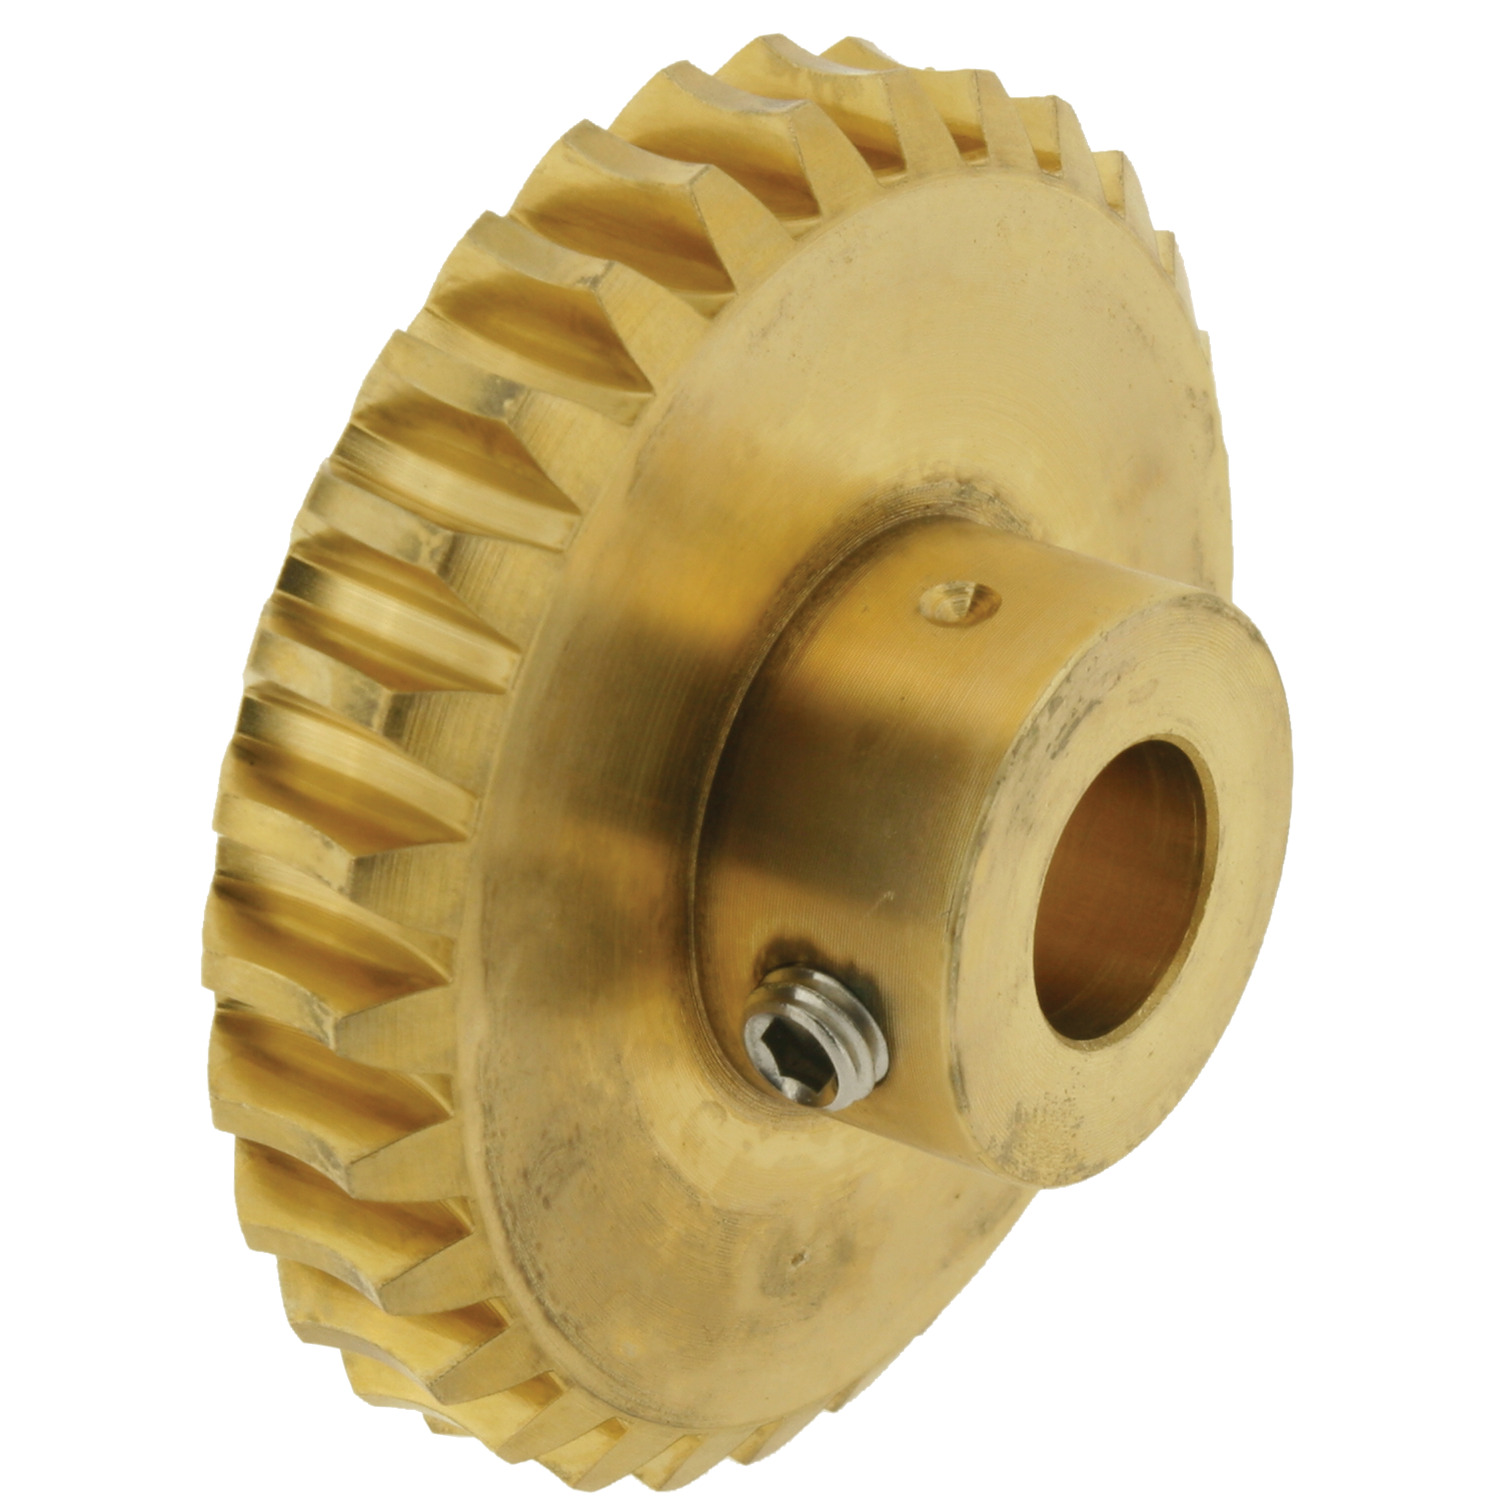 1,0 Module Precision Worm Gears Brass 1,0 Module Precision Worm Gears - Right Hand. DIN 7 / AGMA 10. For small sizes.